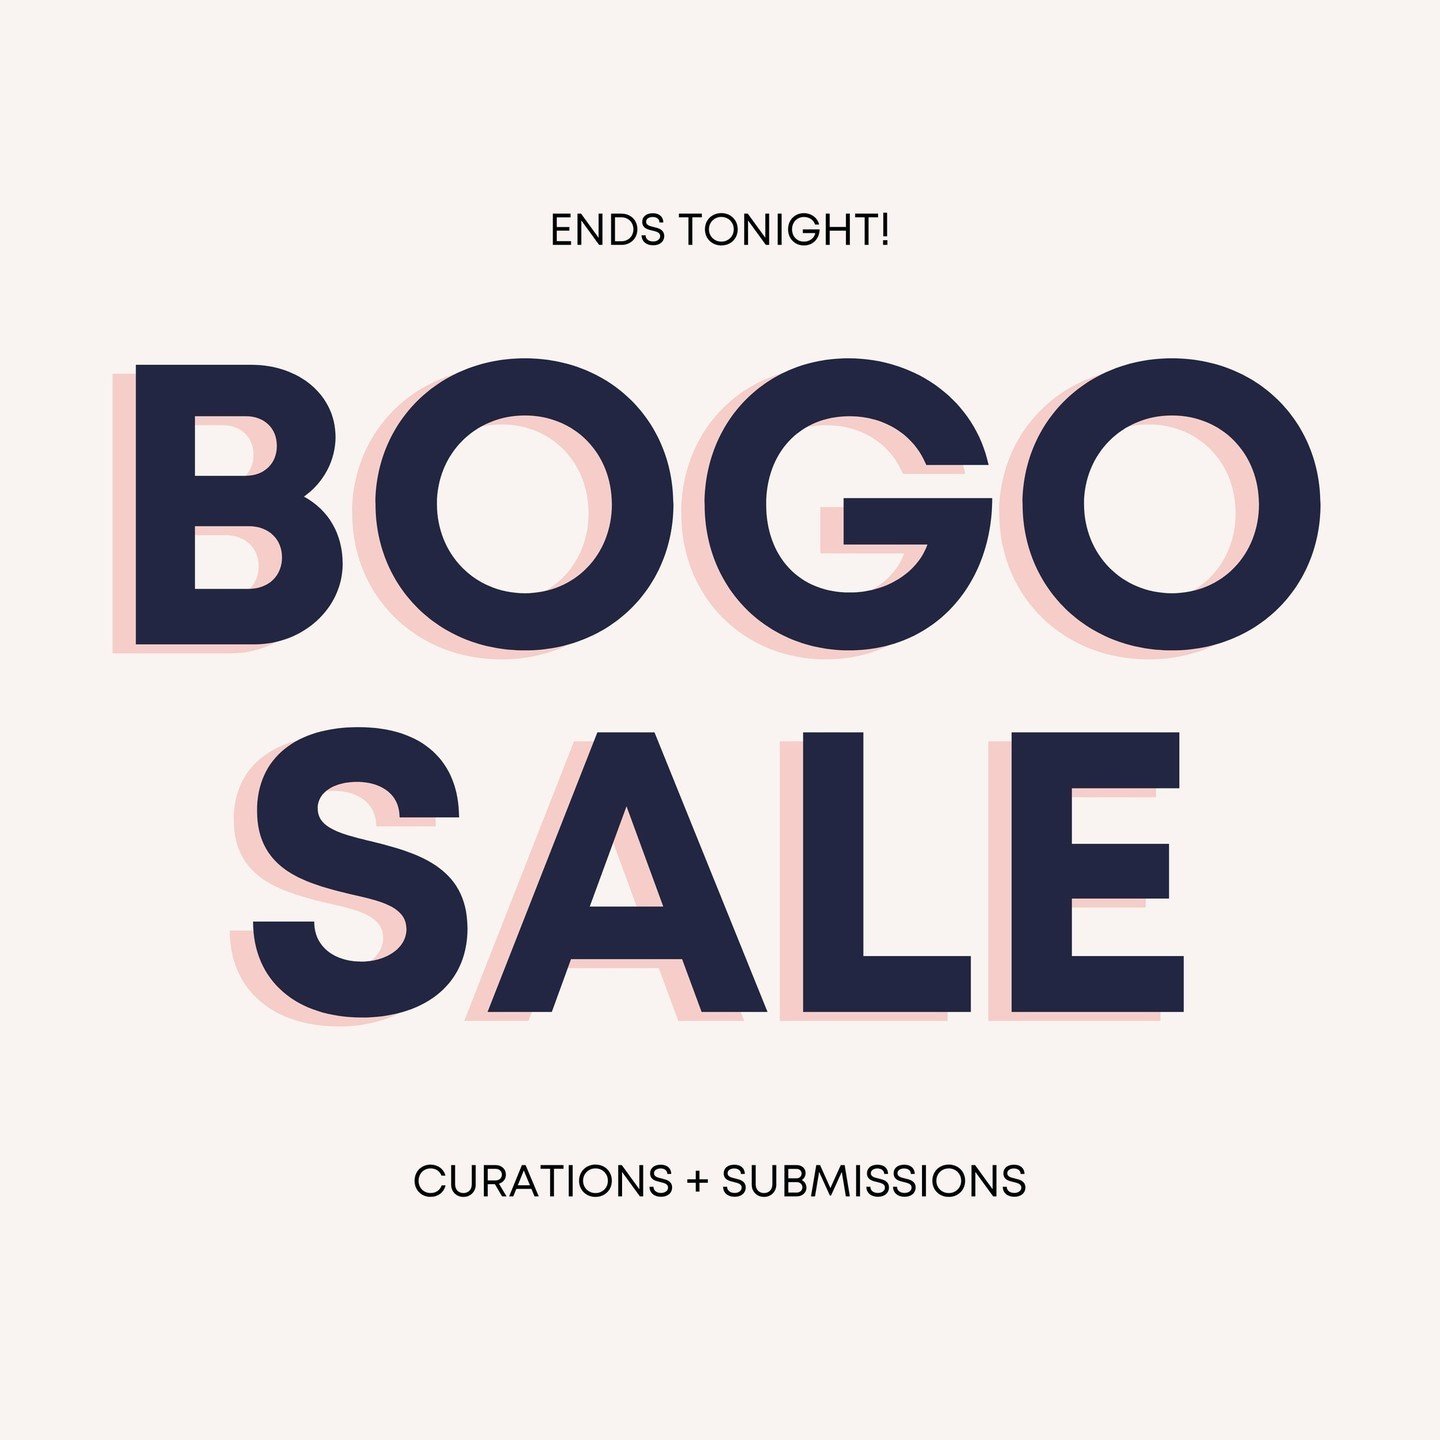 🛑⁠ Last Chance, BOGO ends tonight! 🛑⁠
⁠
This is your final reminder to jump in and get your curation service before tonight. Purchase any of our curation or submission services, you will receive the same service for FREE! 🤯⁠
⁠
Here's what we offer